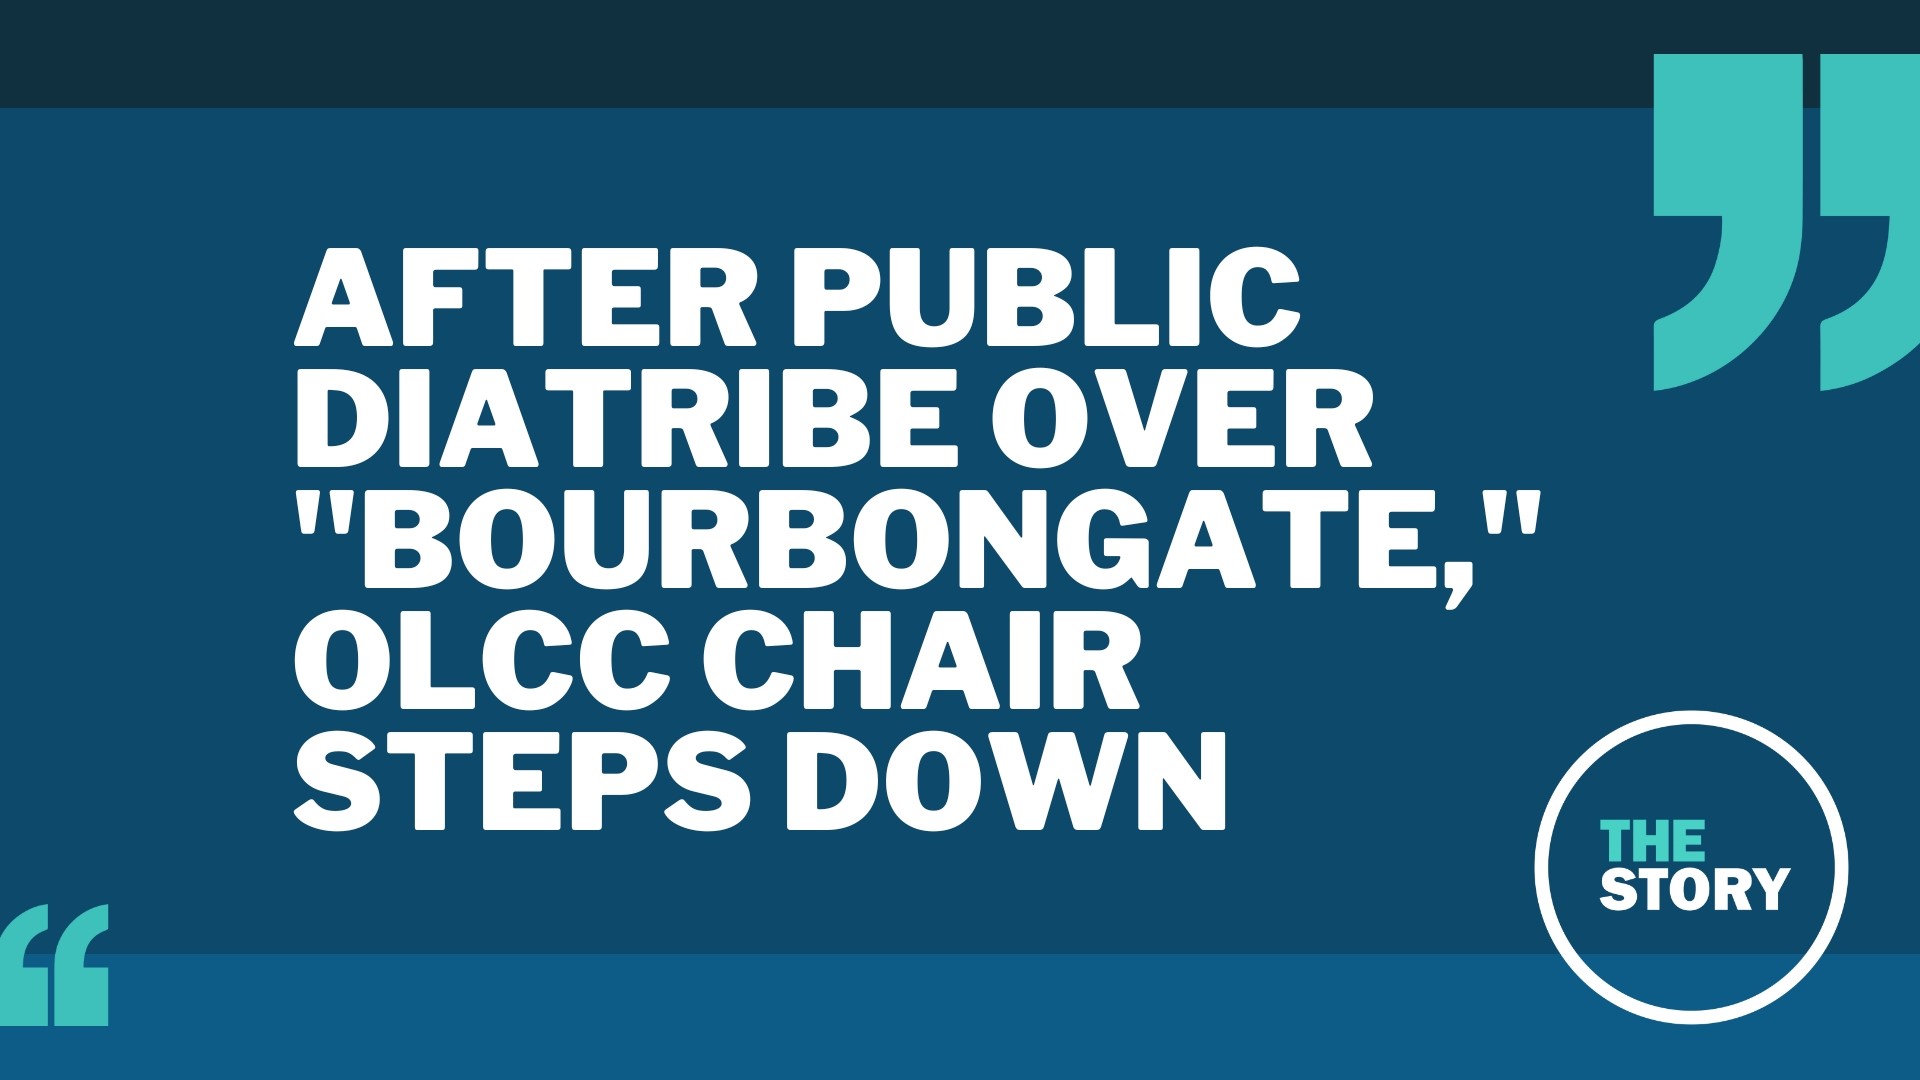 After delivering a diatribe about press scrutiny over the “Bourbongate” scandal at OLCC, Chairman Paul Rosenbaum heeded a request to step down.